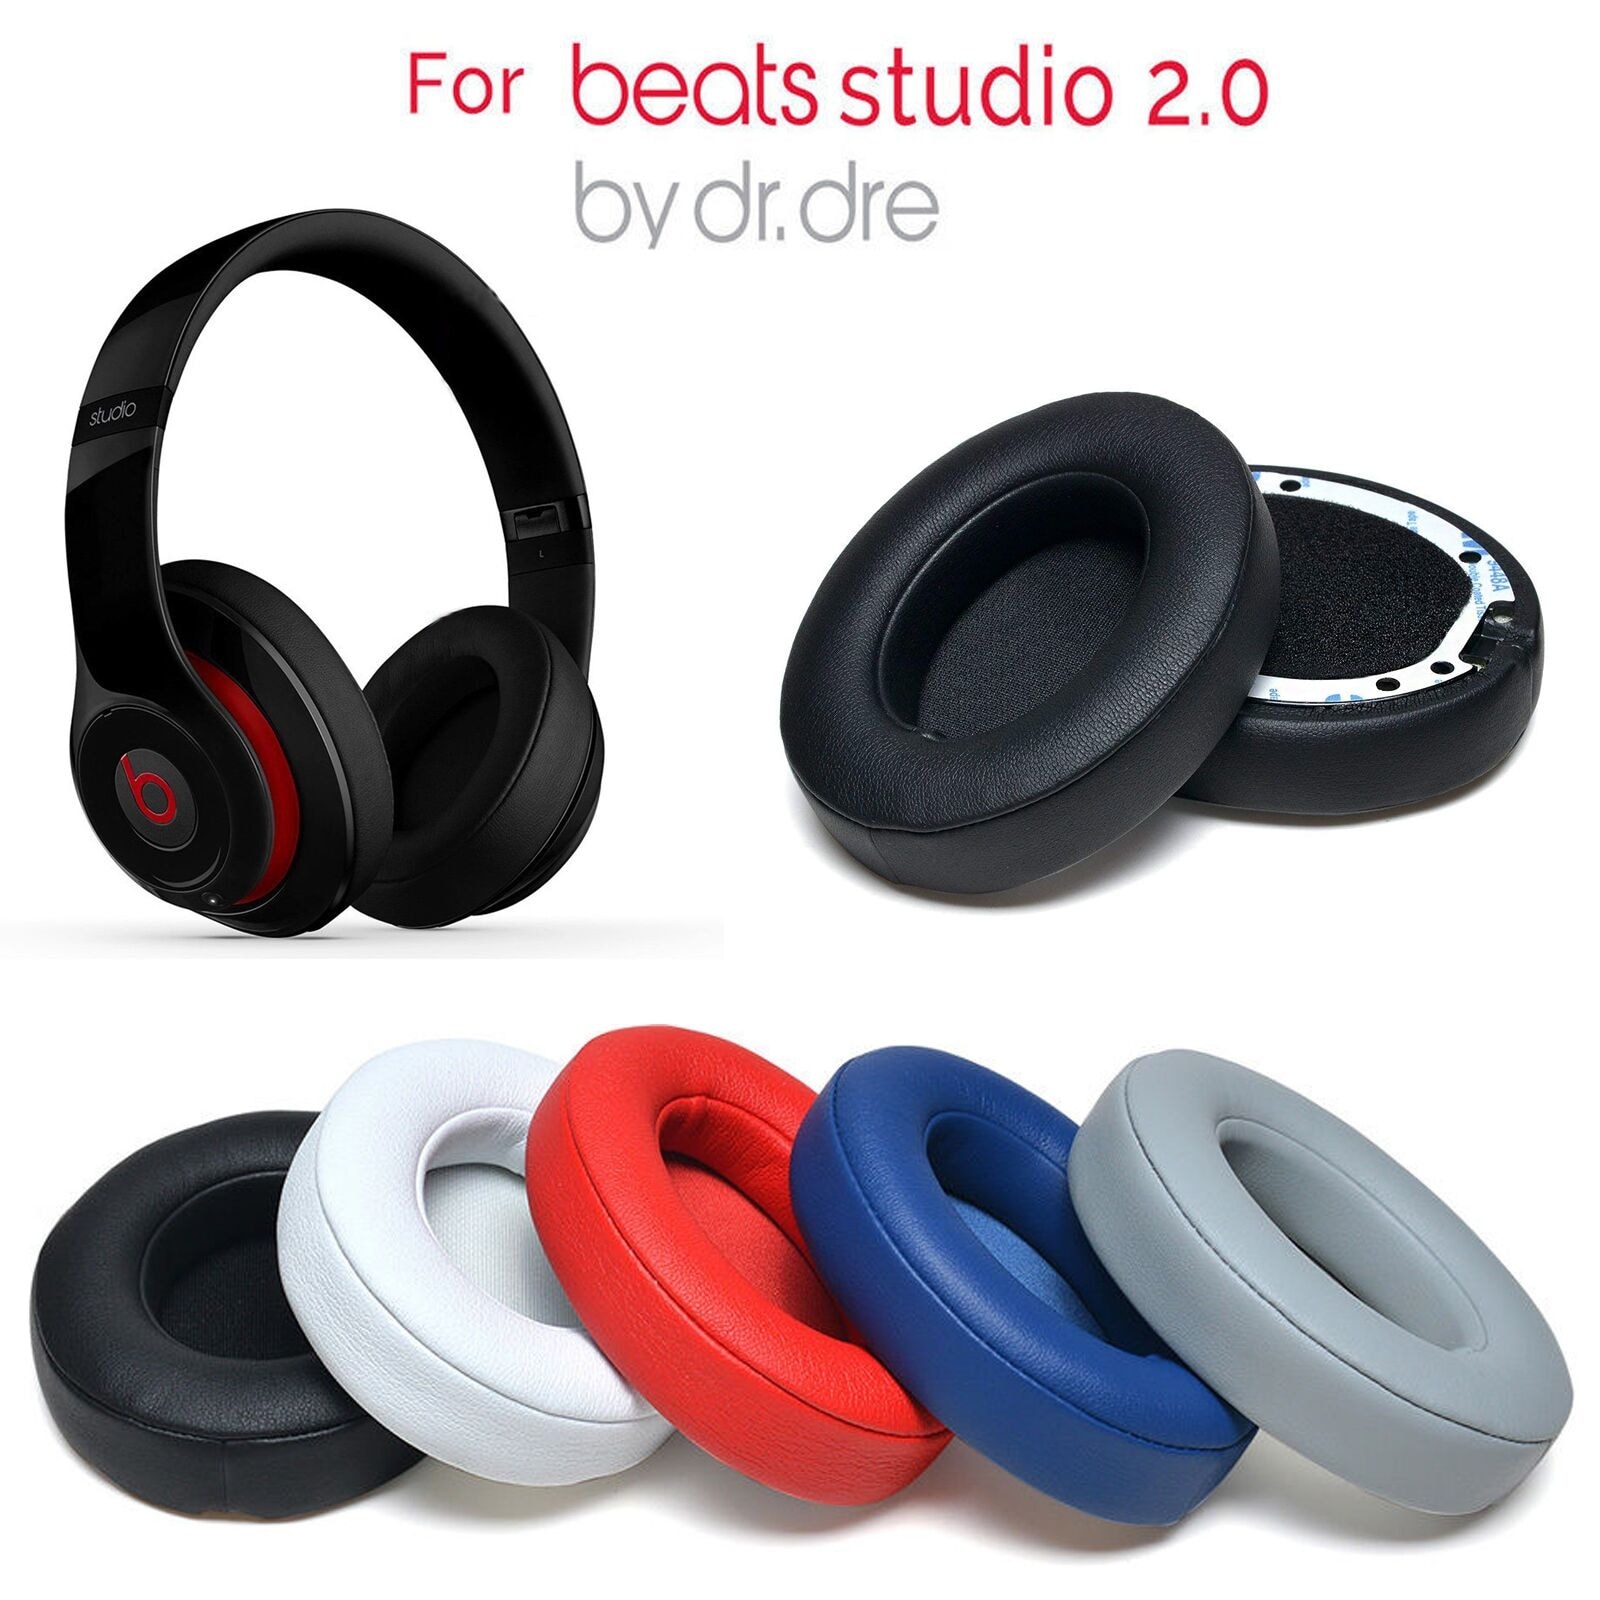 replace ear pads on beats